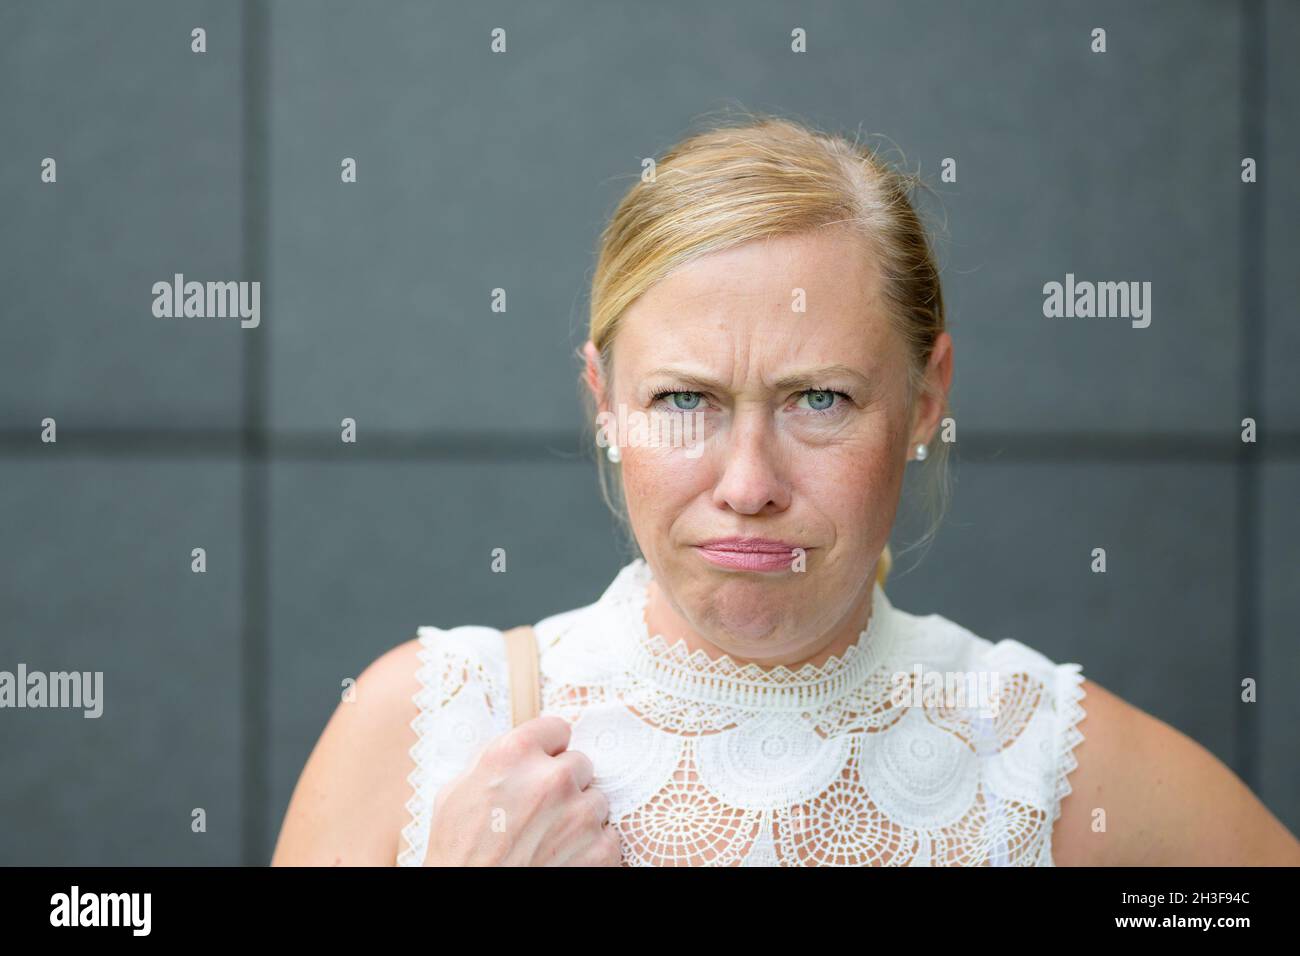 Angry petulant blond woman glaring at the camera with an intense expression against a grey wall in a close up portrait Stock Photo